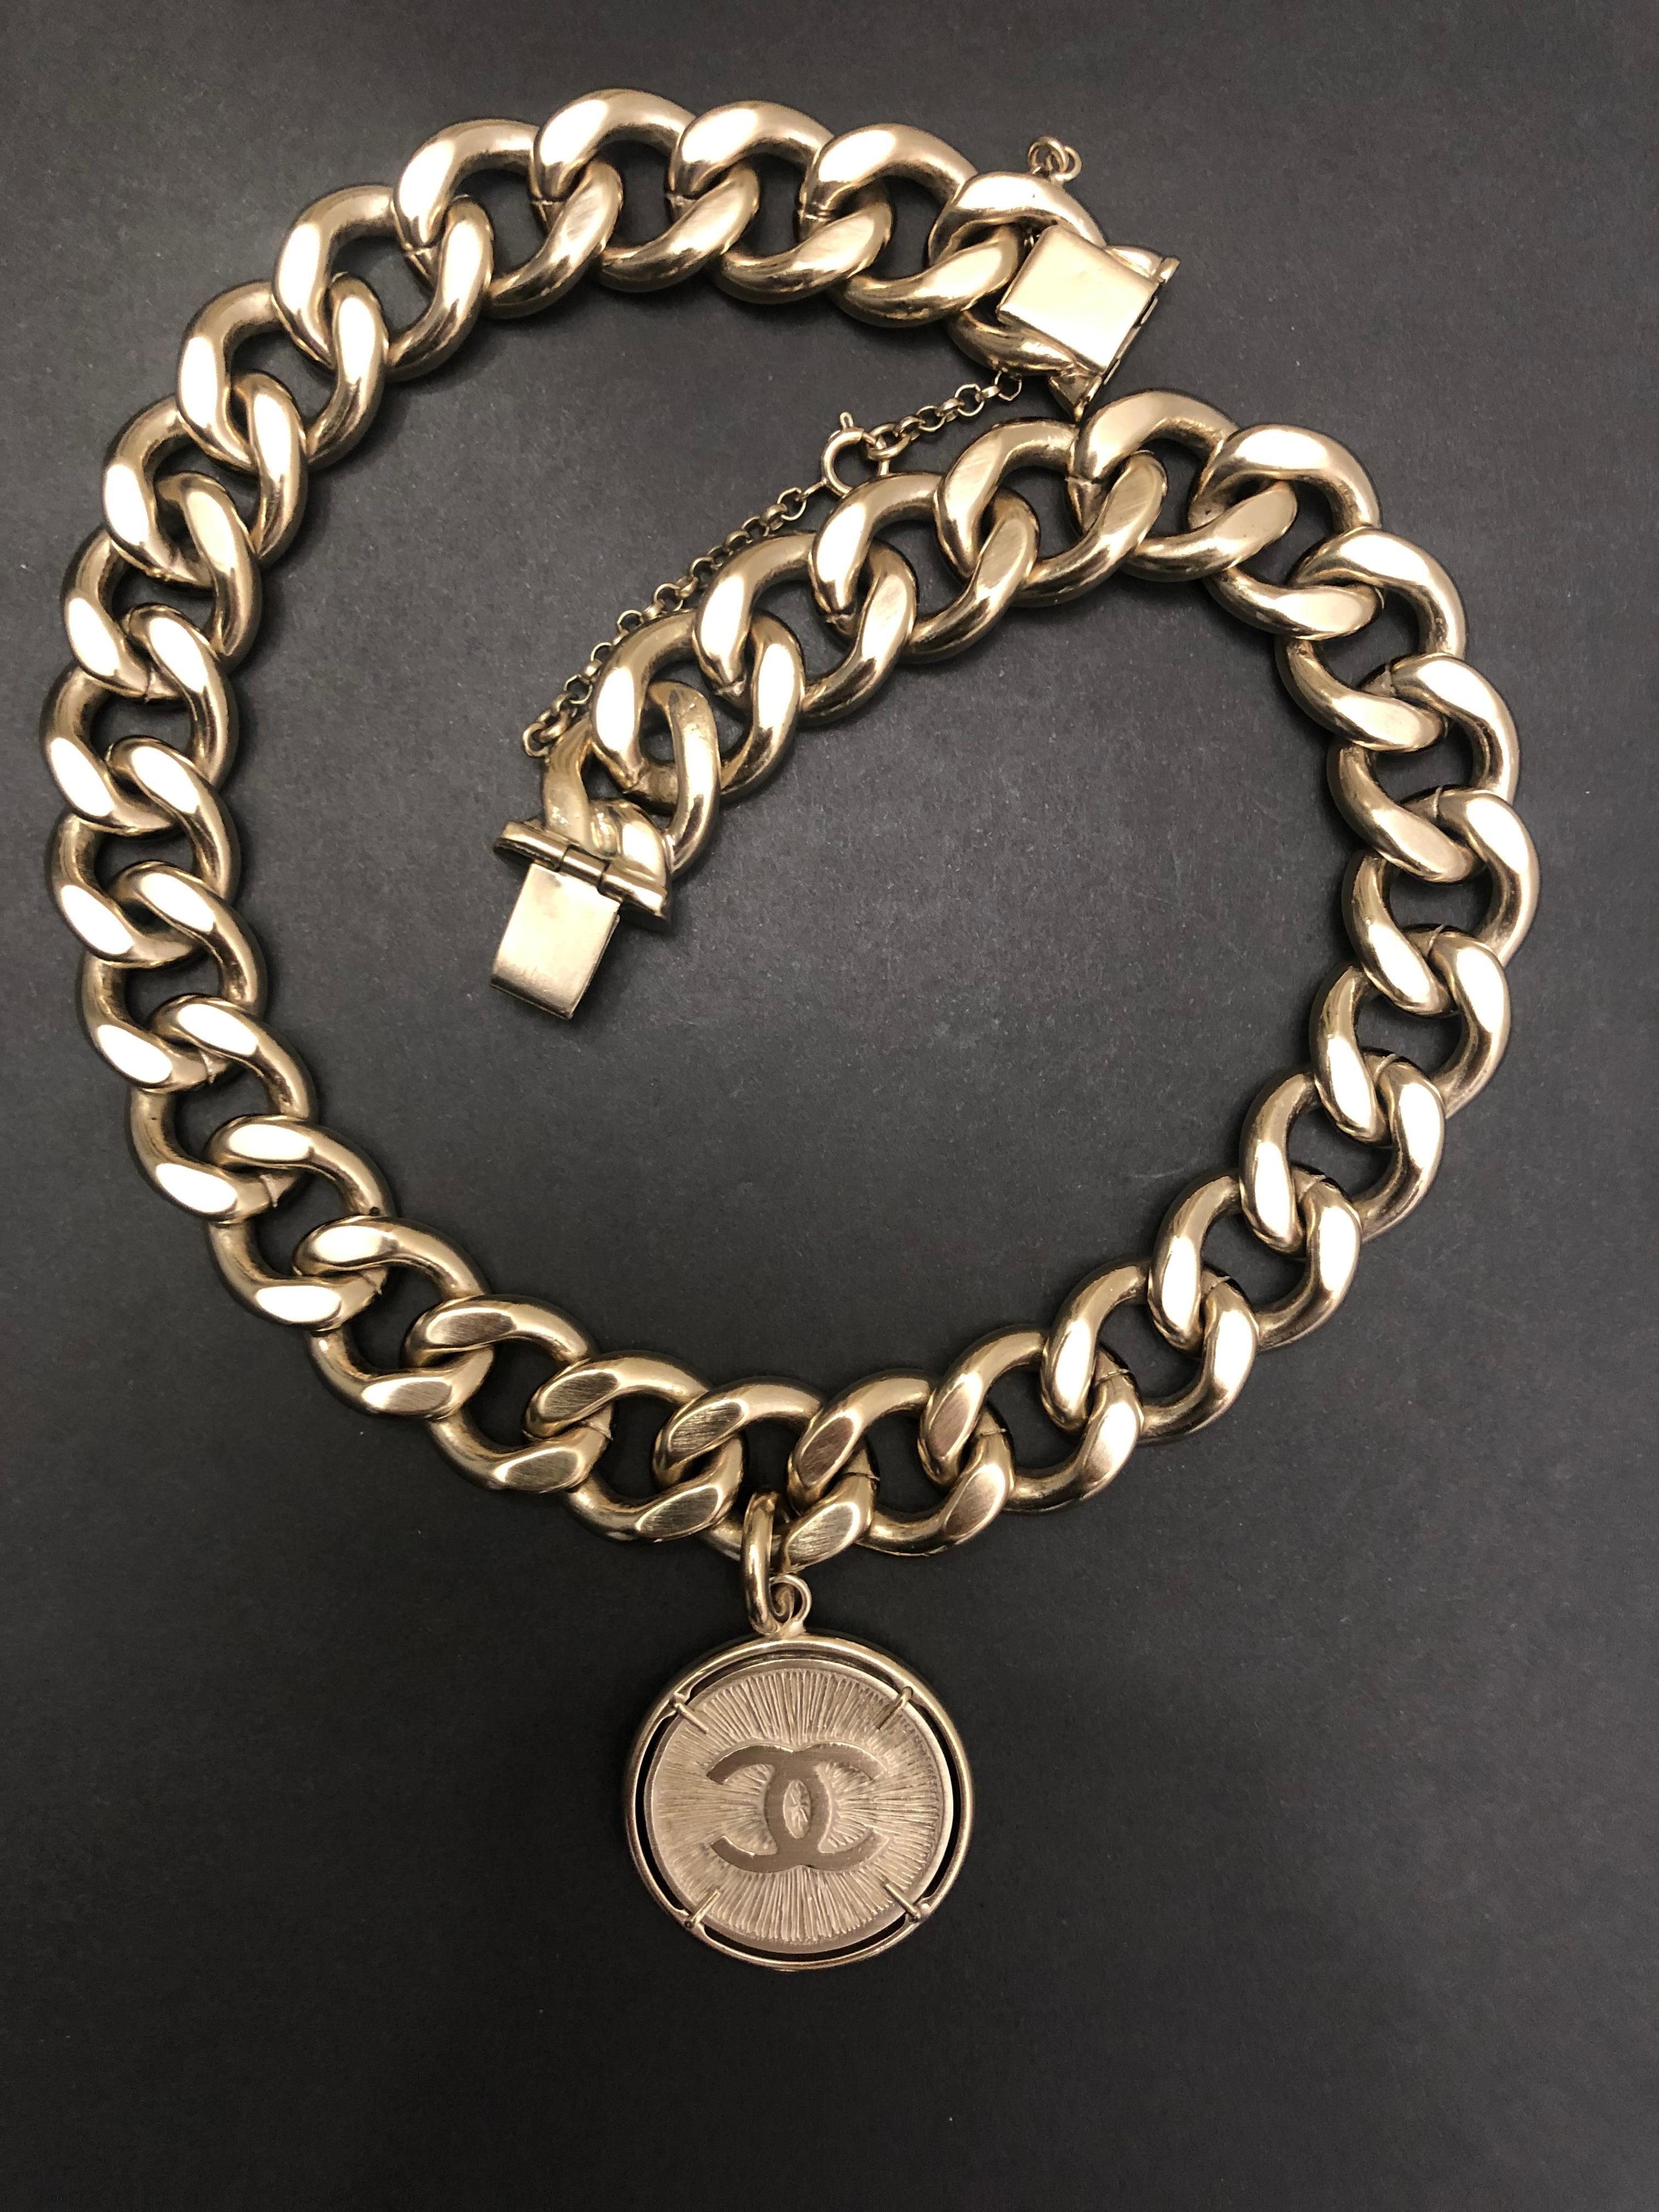 This CHANEL choker chain necklace is crafted of chunky champagne toned chain centered a CC coin charm. The champagne gold color gives it a contemporary look that suits both sexes. The length measures approximately 41 cm. Stamped CHANEL 06P made in